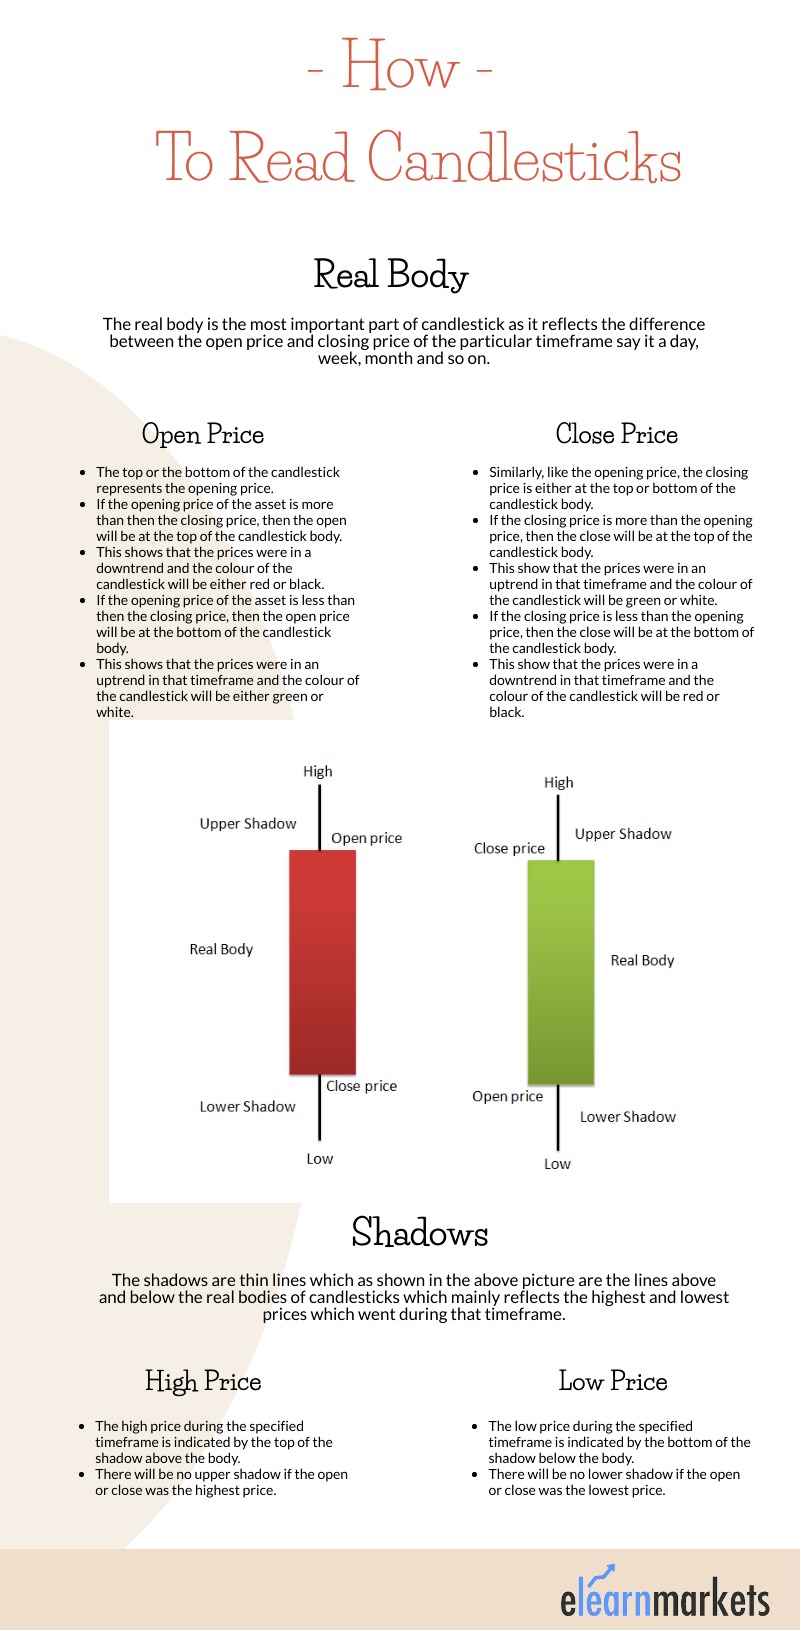 Formation of candlestick and how to read a candlestick.